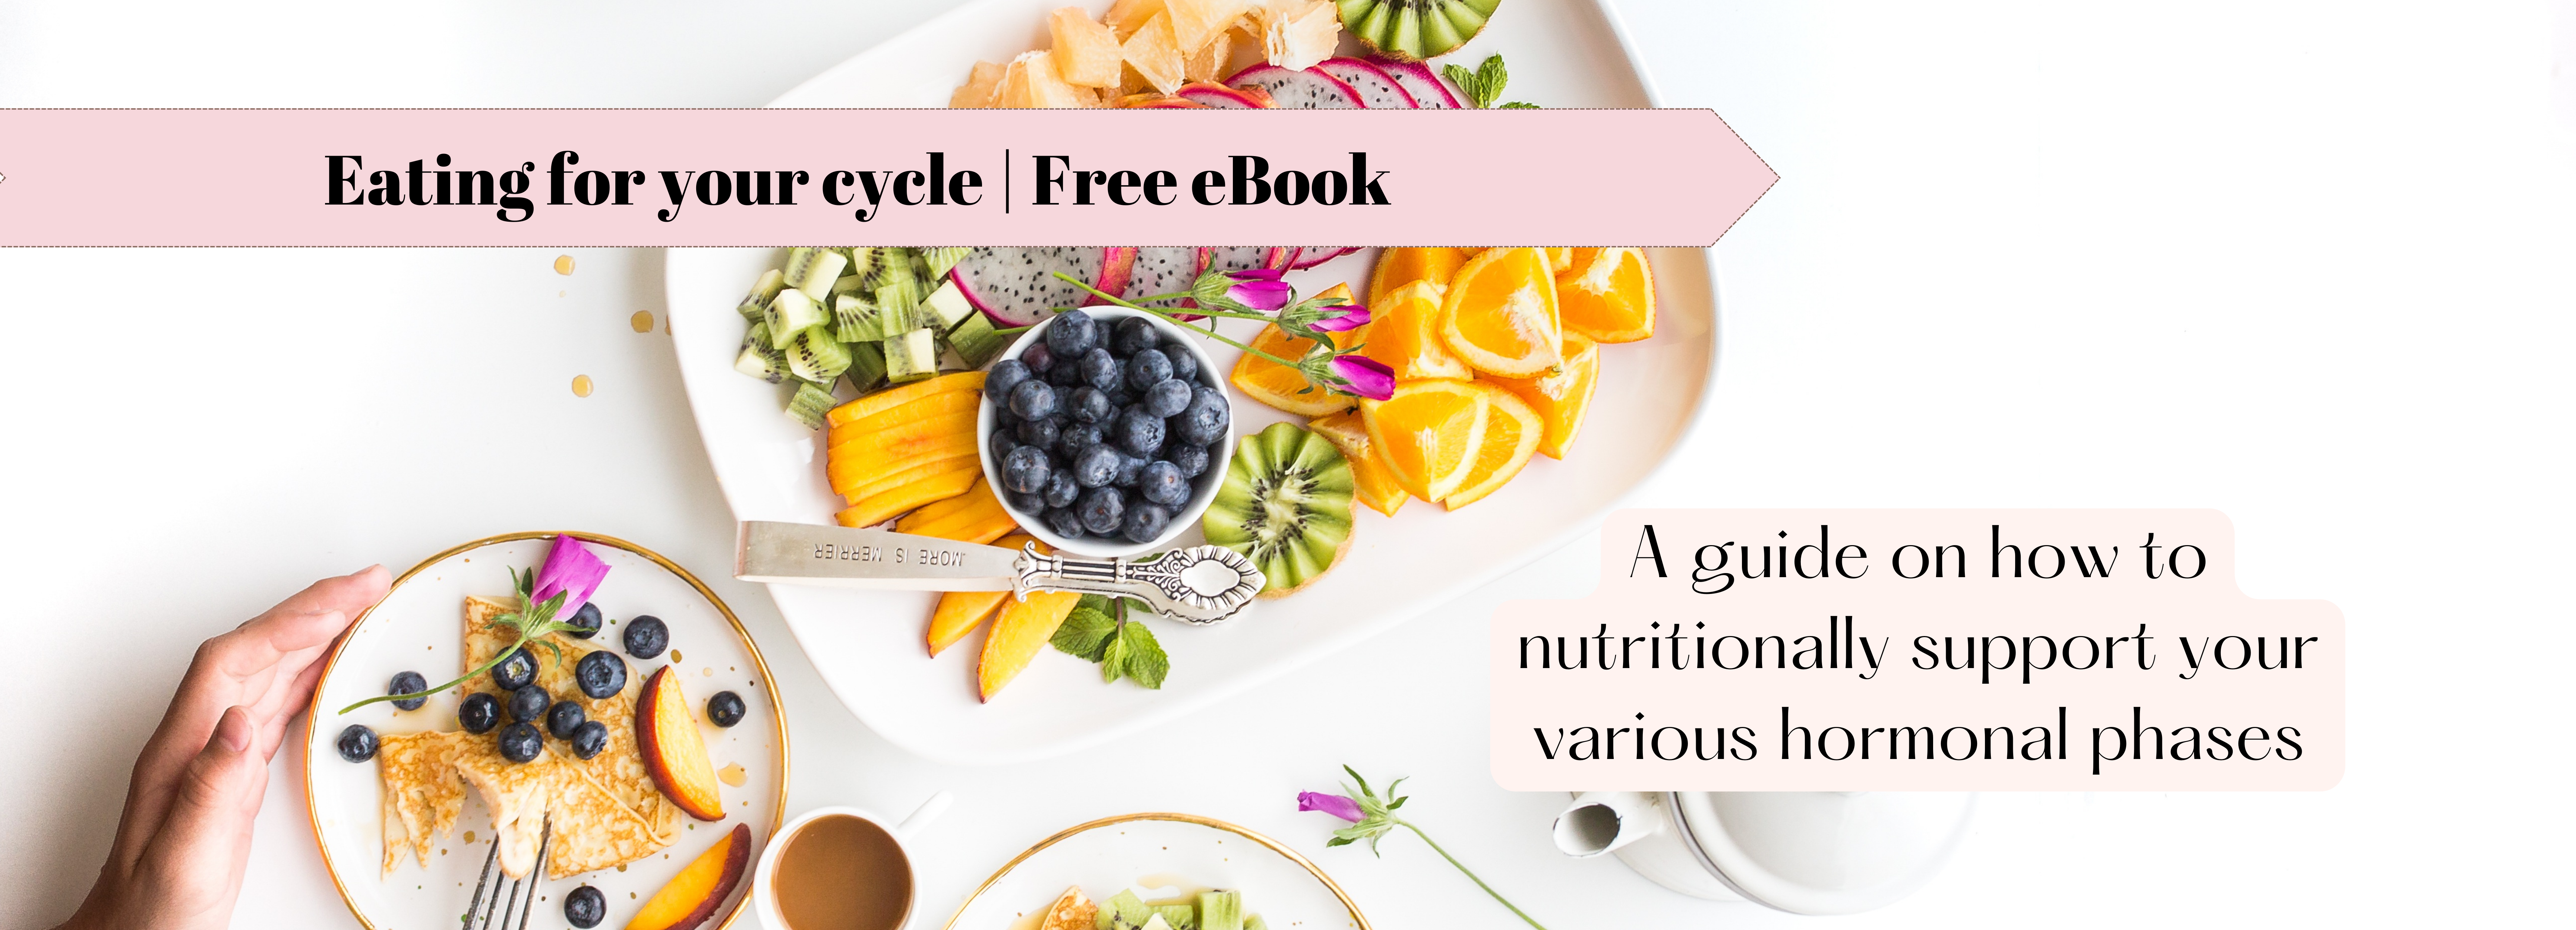 Eating for your cycle ebook